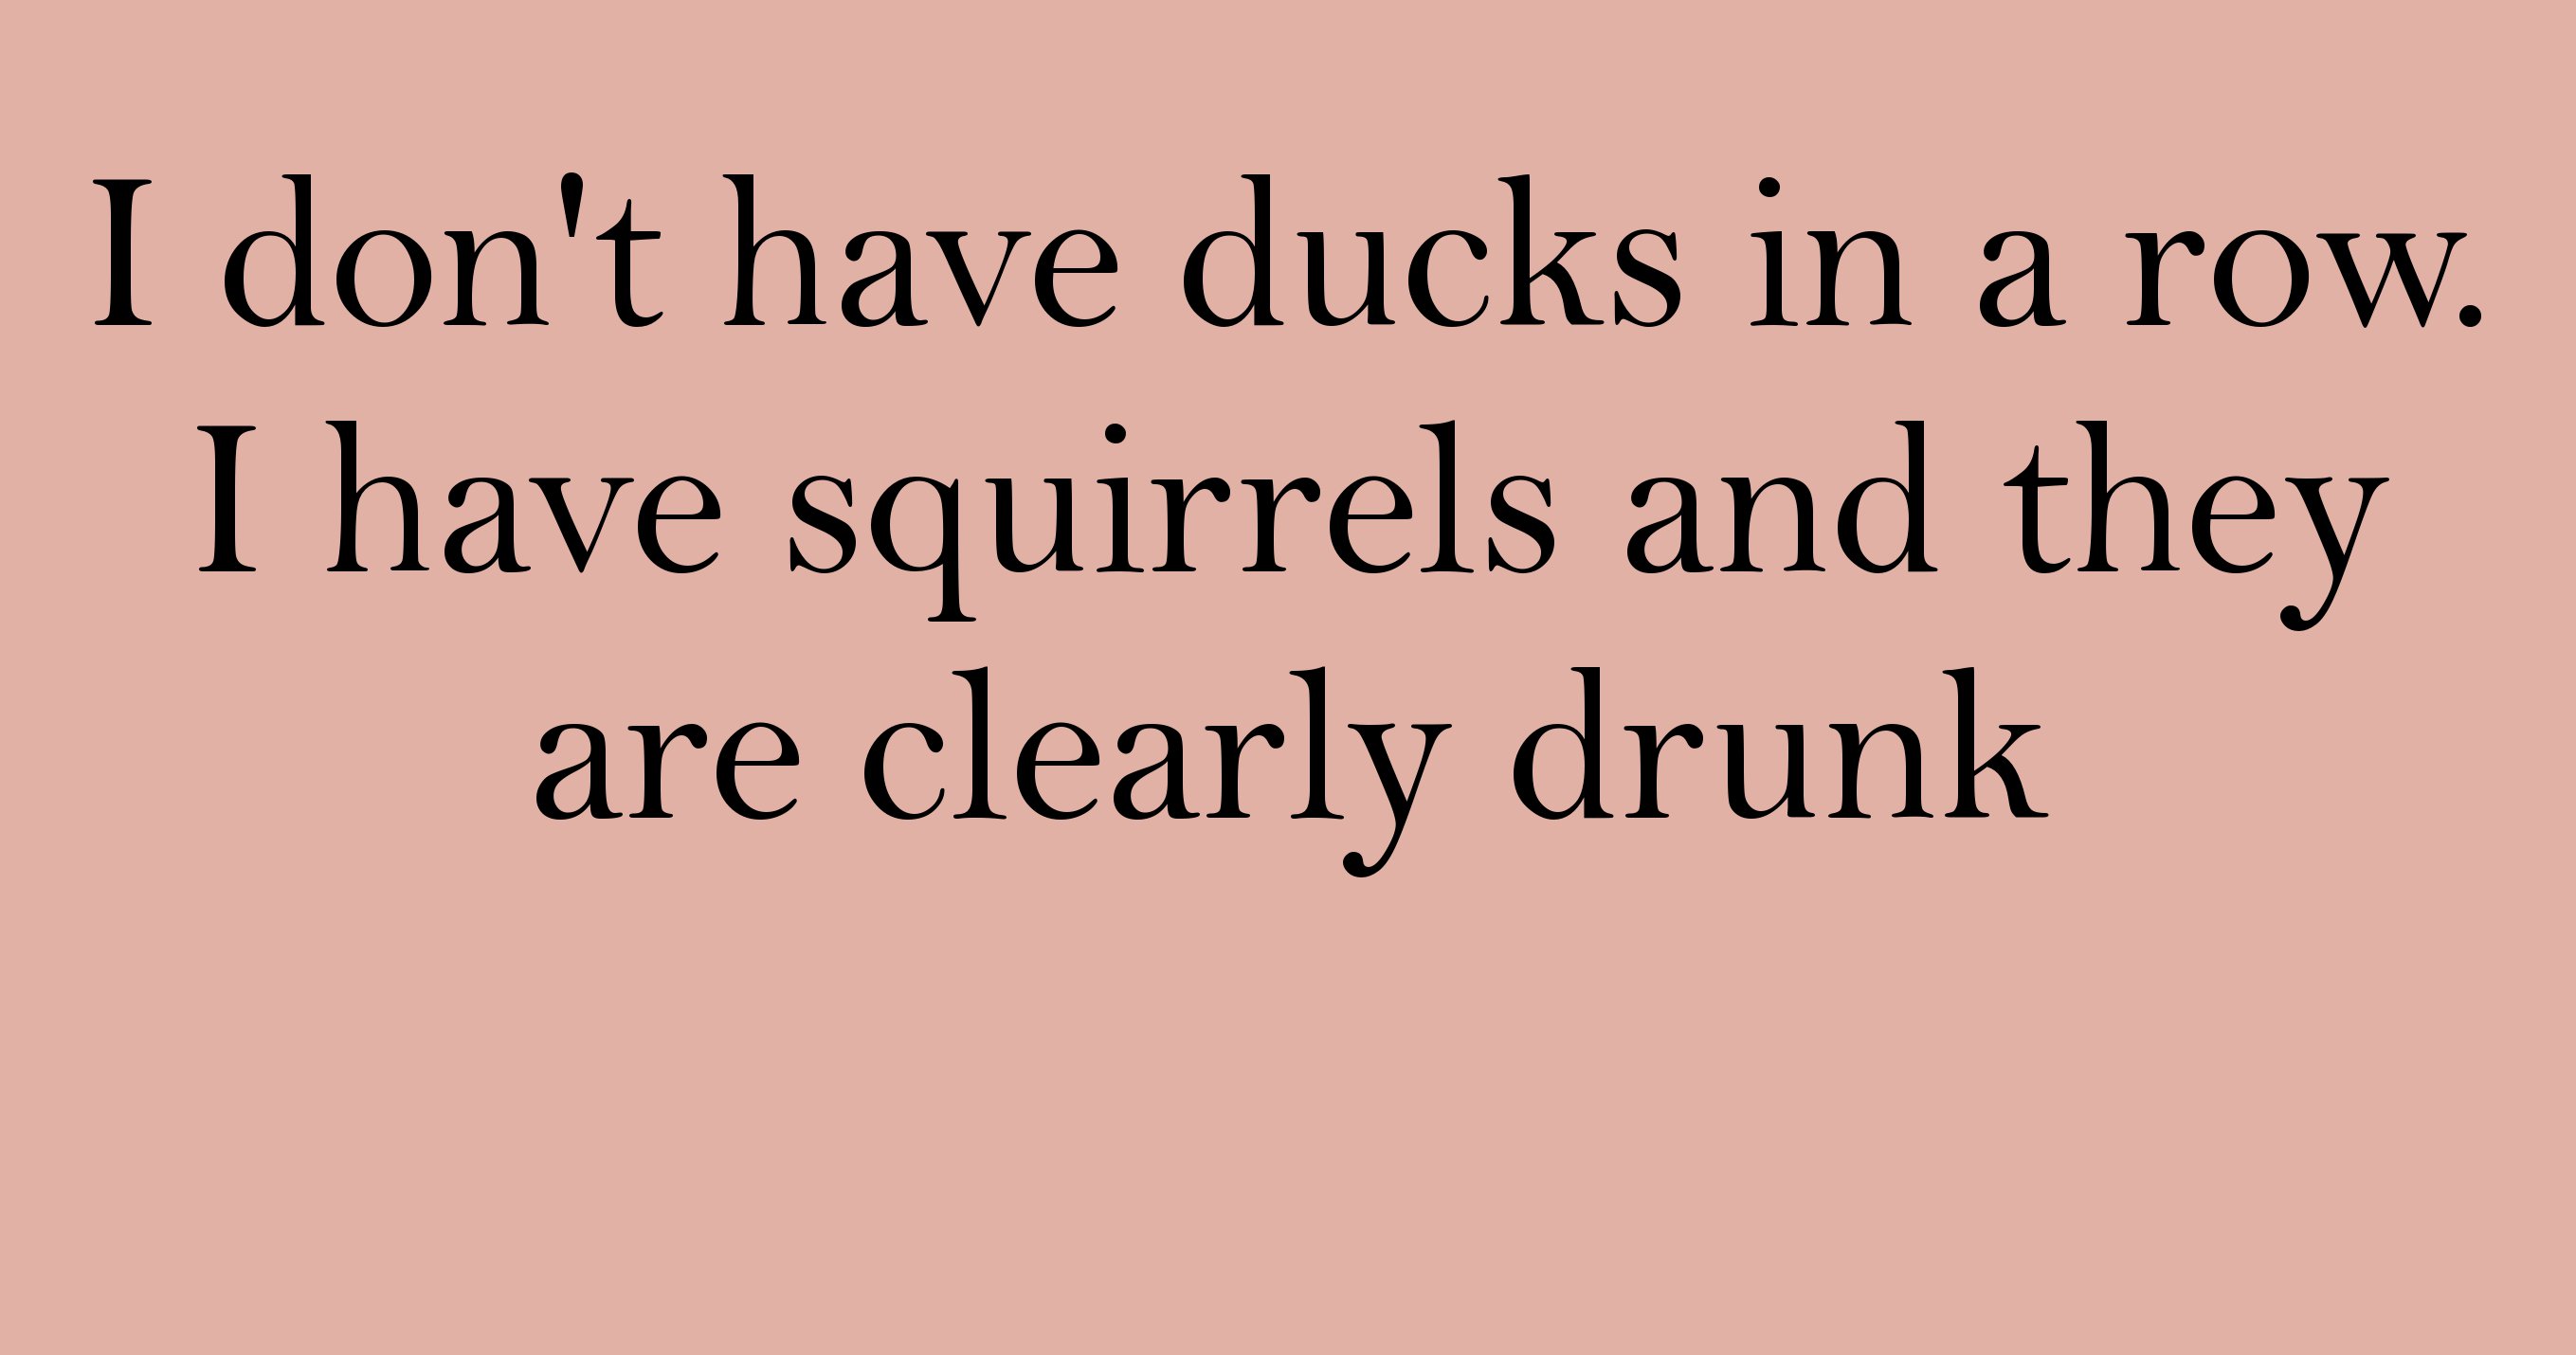 handwriting - I don't have ducks in a row. I have squirrels and they are clearly drunk